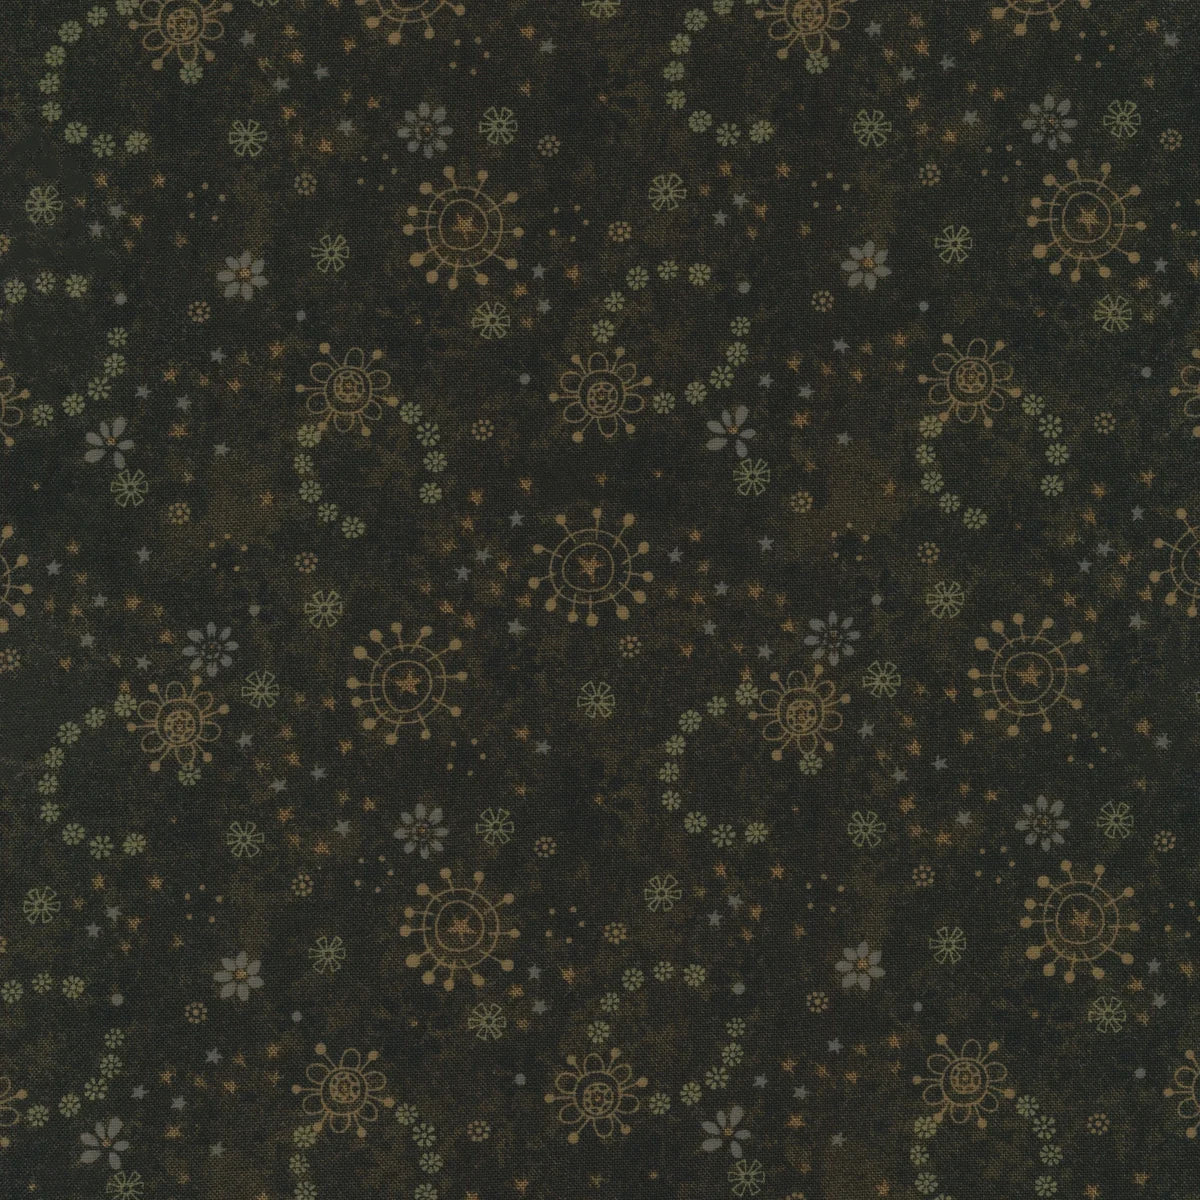 Froth and Bubble - Dark Brown